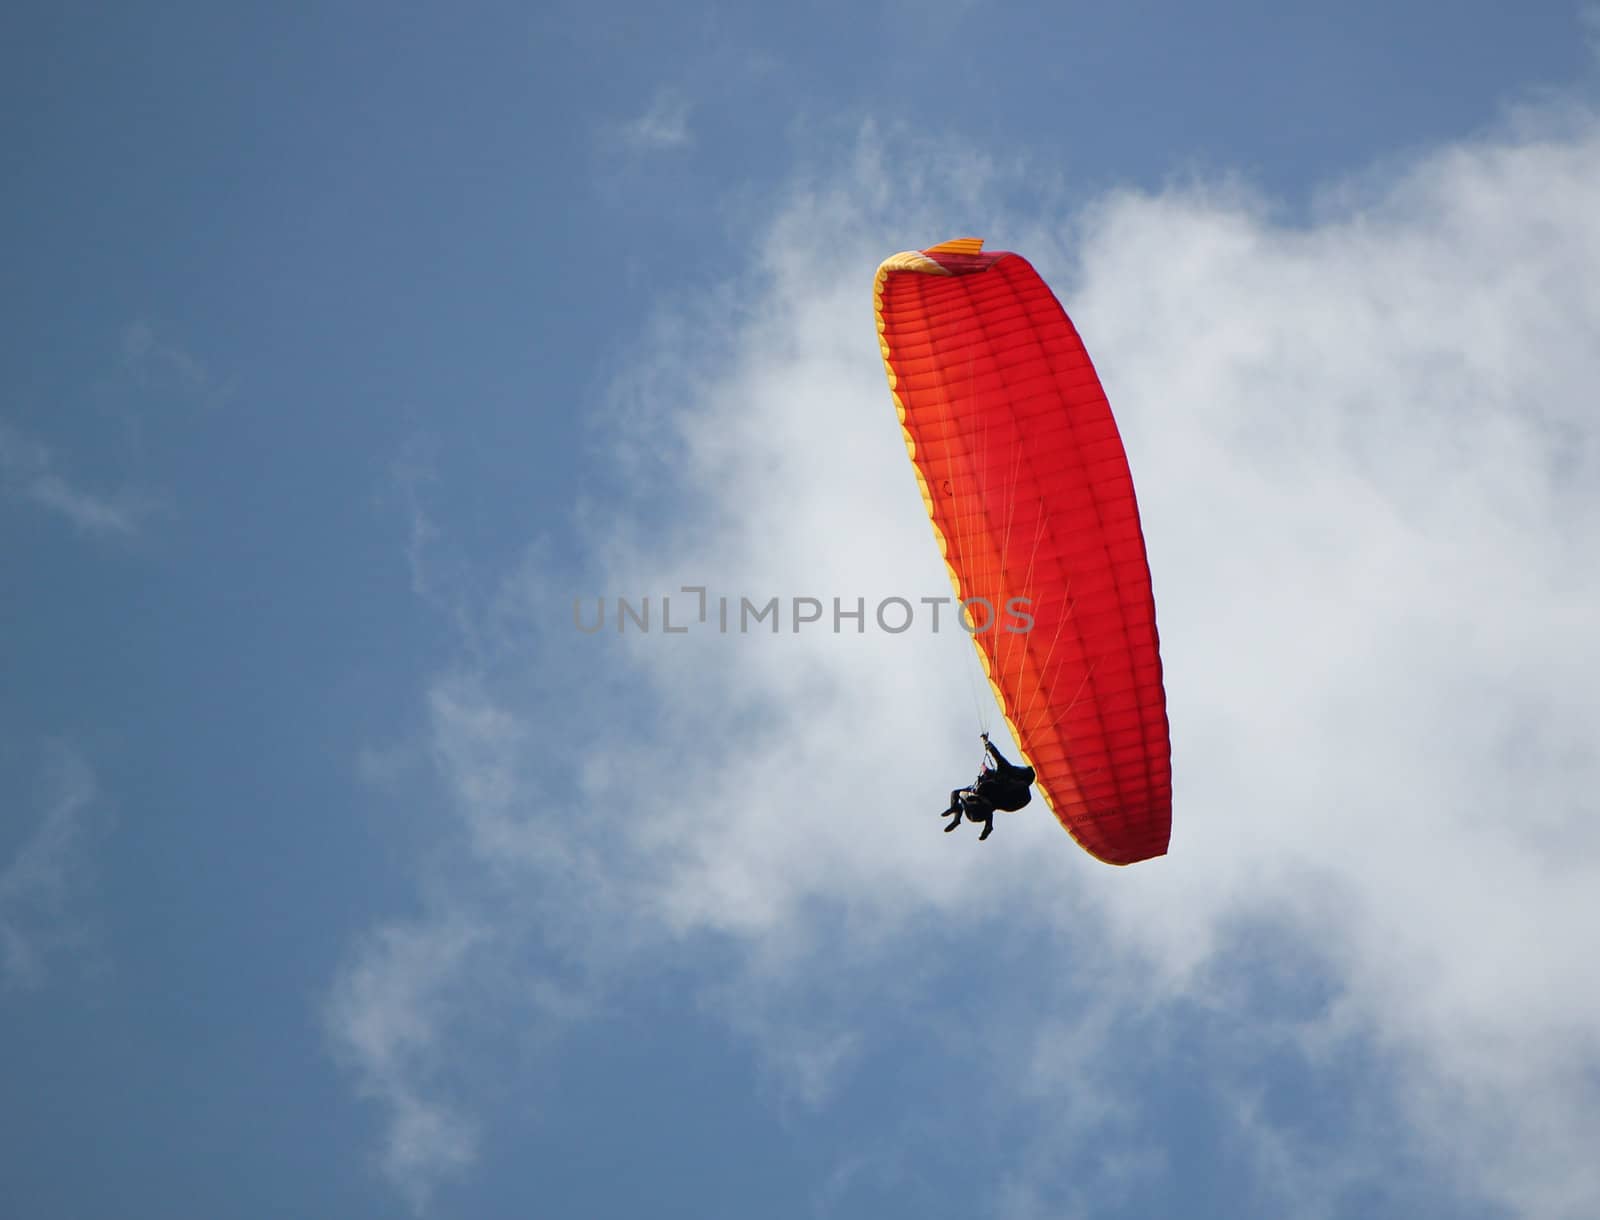 Man flying in the cloudy sky with its red paragliding